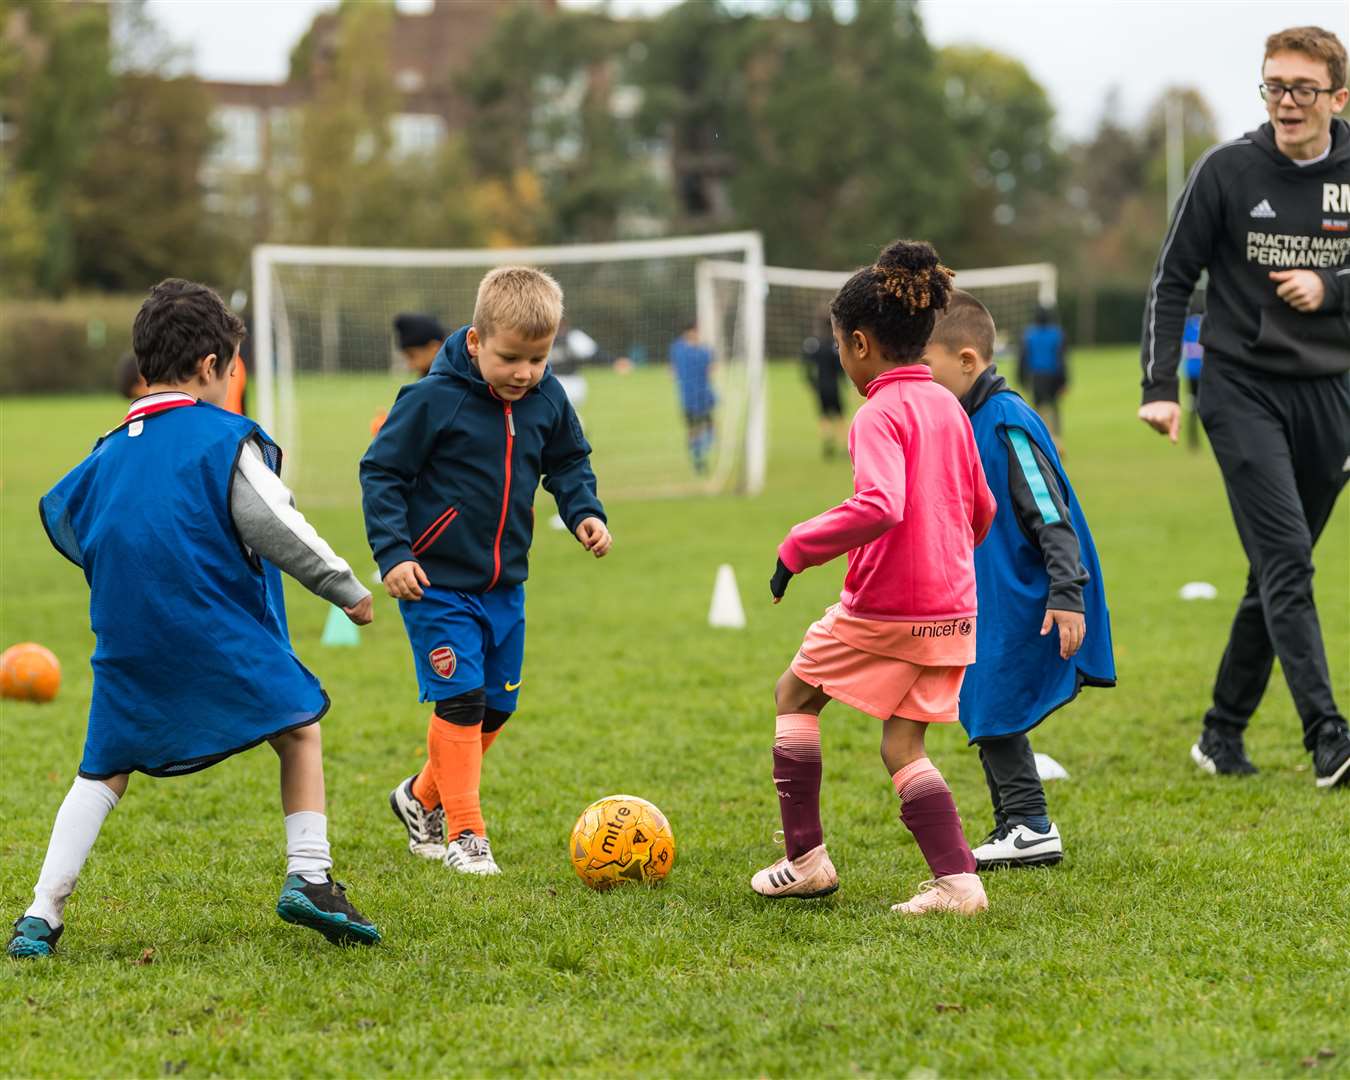 Children playing at a We Make Footballers Session in London (21166976)